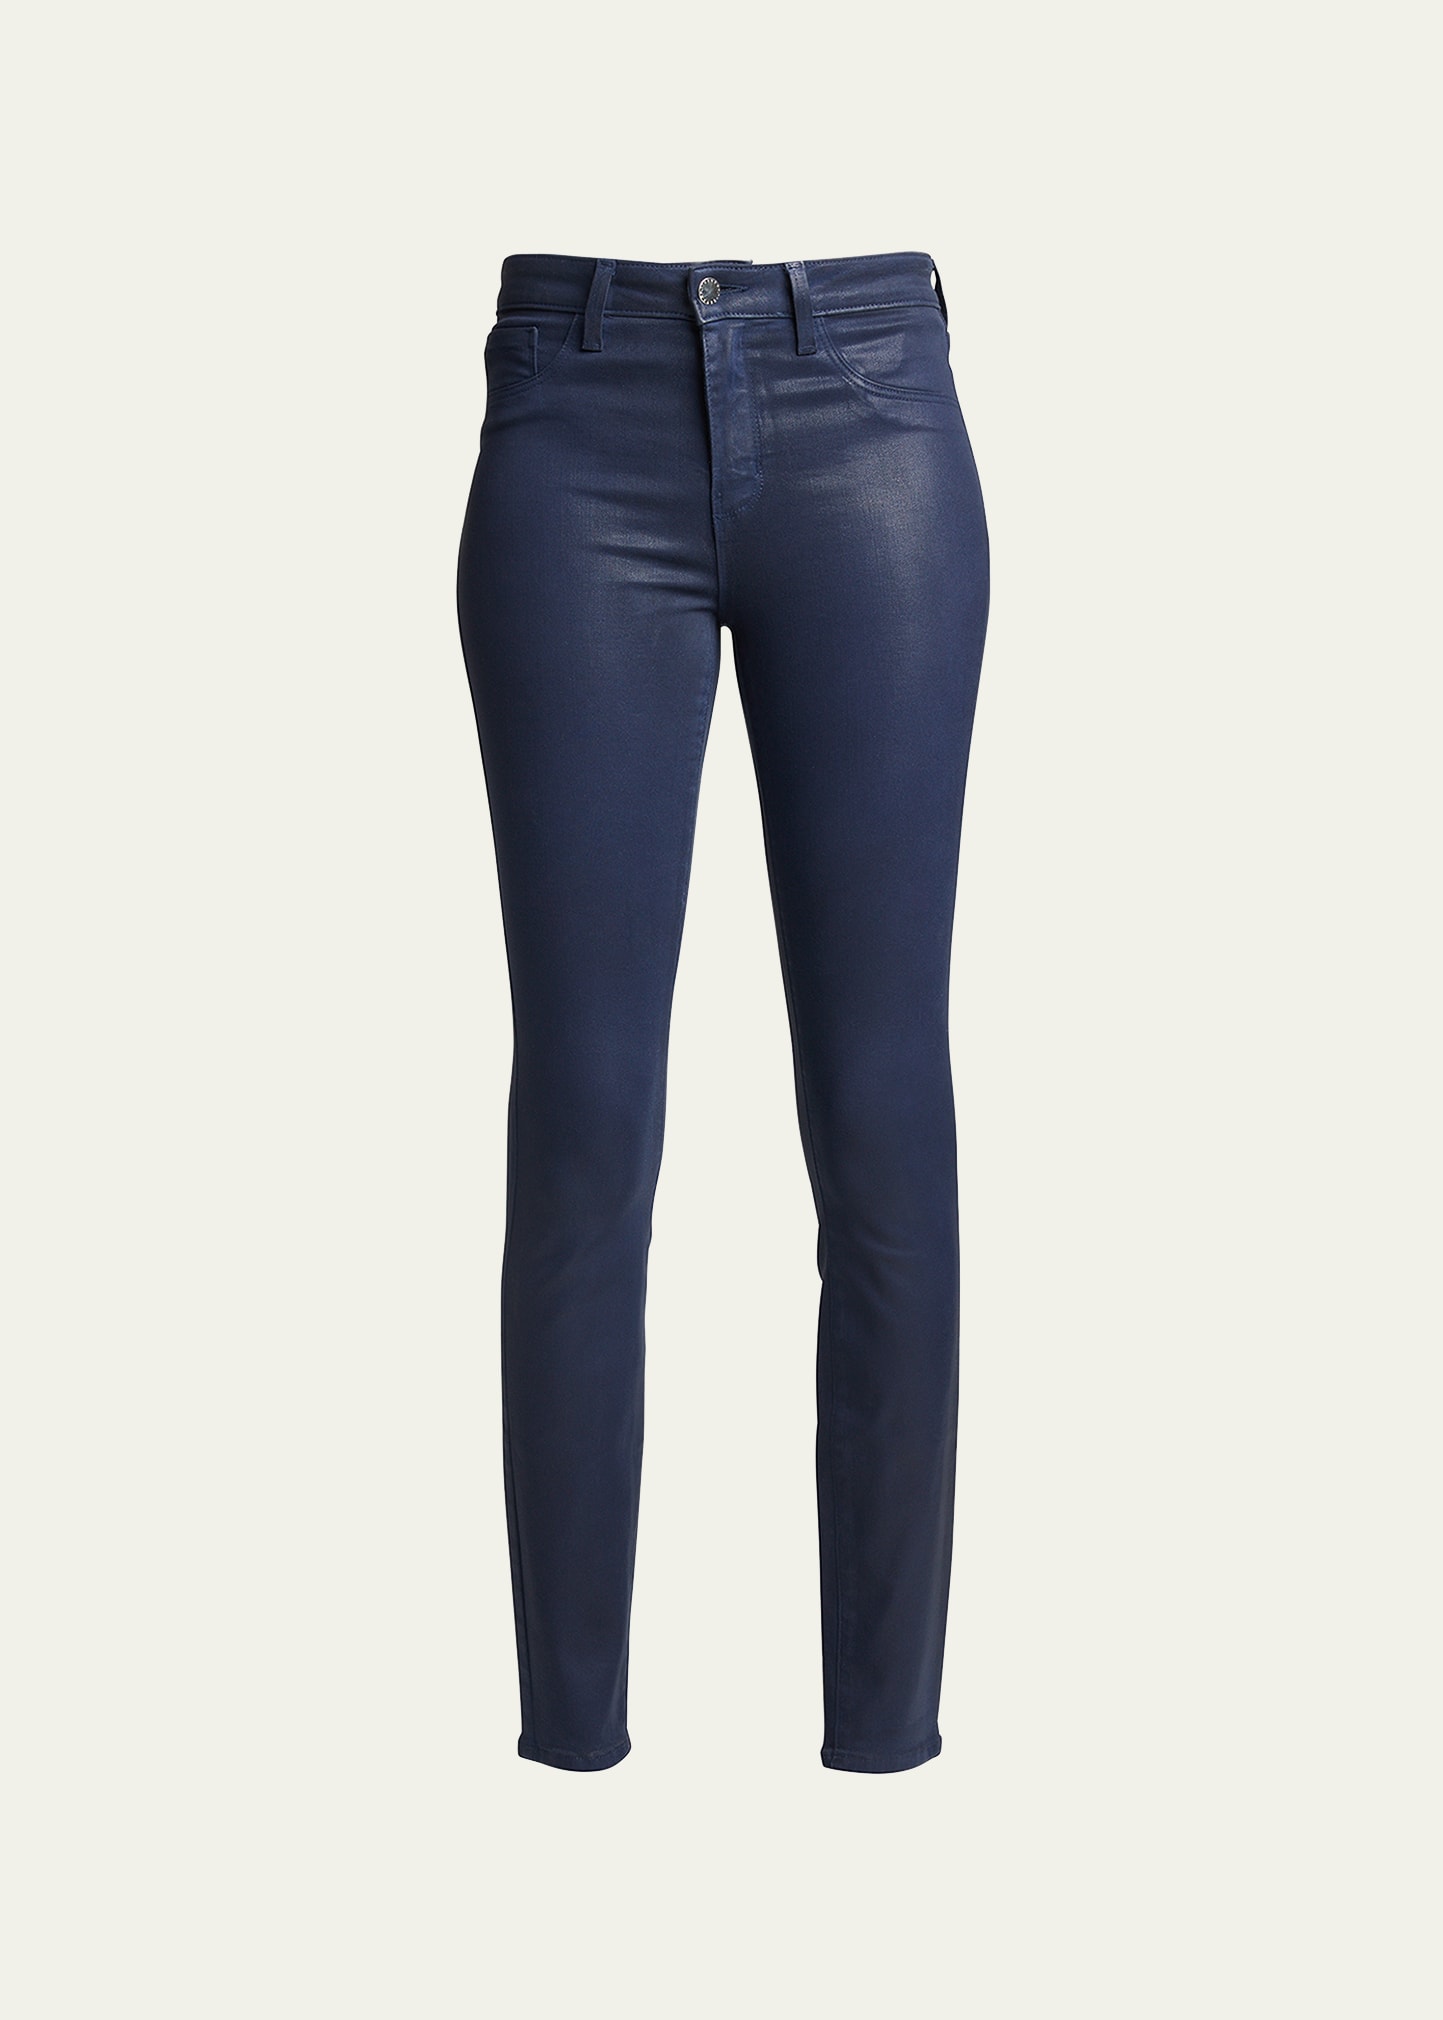 L'Agence Margot High-Rise Coated Skinny Jeans